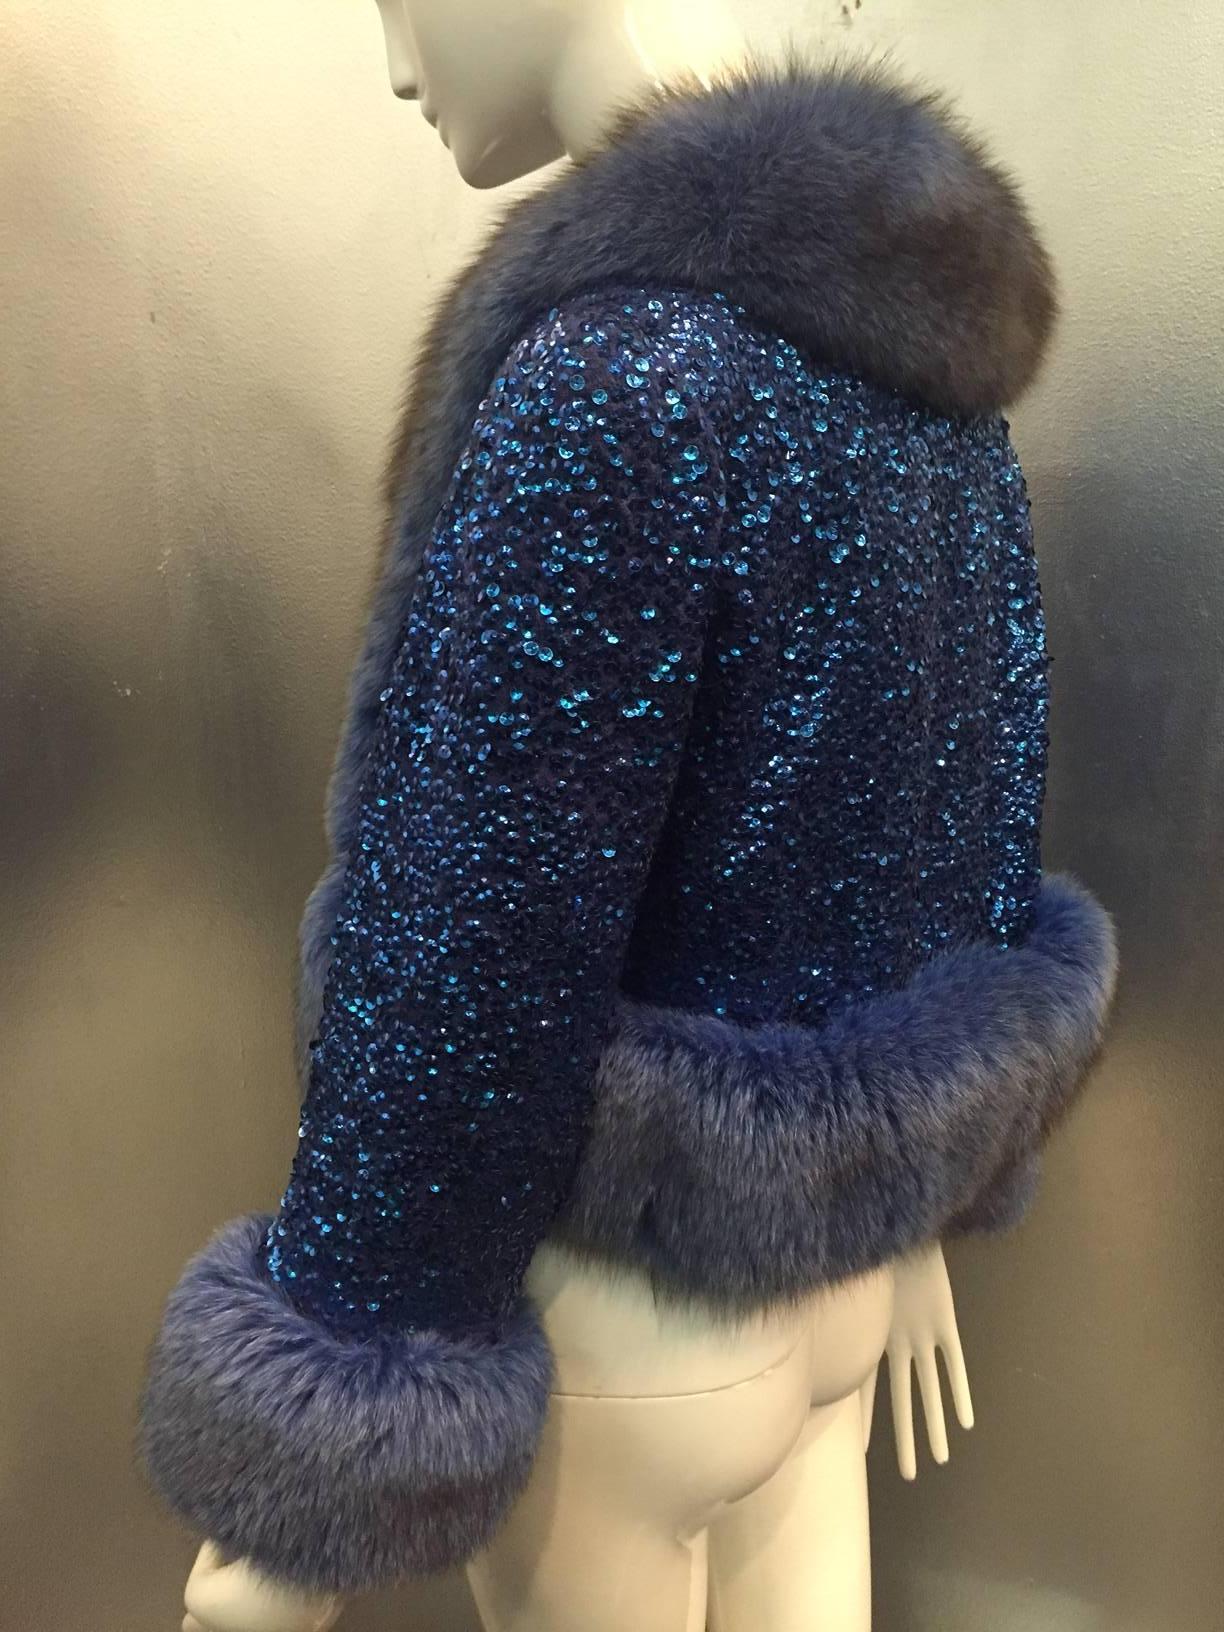 1960s cobalt blue sequin encrusted wool bolero jacket with blue dyed fox trim on cuffs and around entire jacket. Silk lined, no closure. Attributed to Travilla.